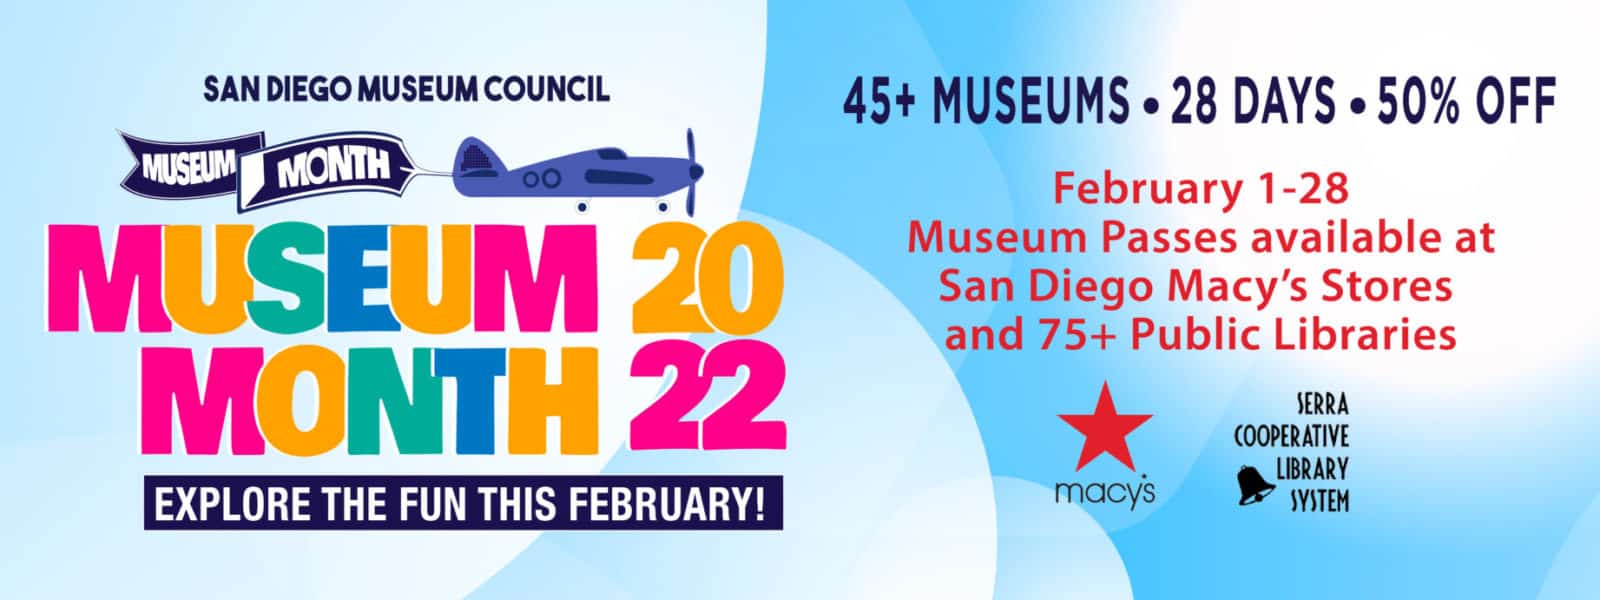 San Diego Museum 2022 from the San Diego Museum Council